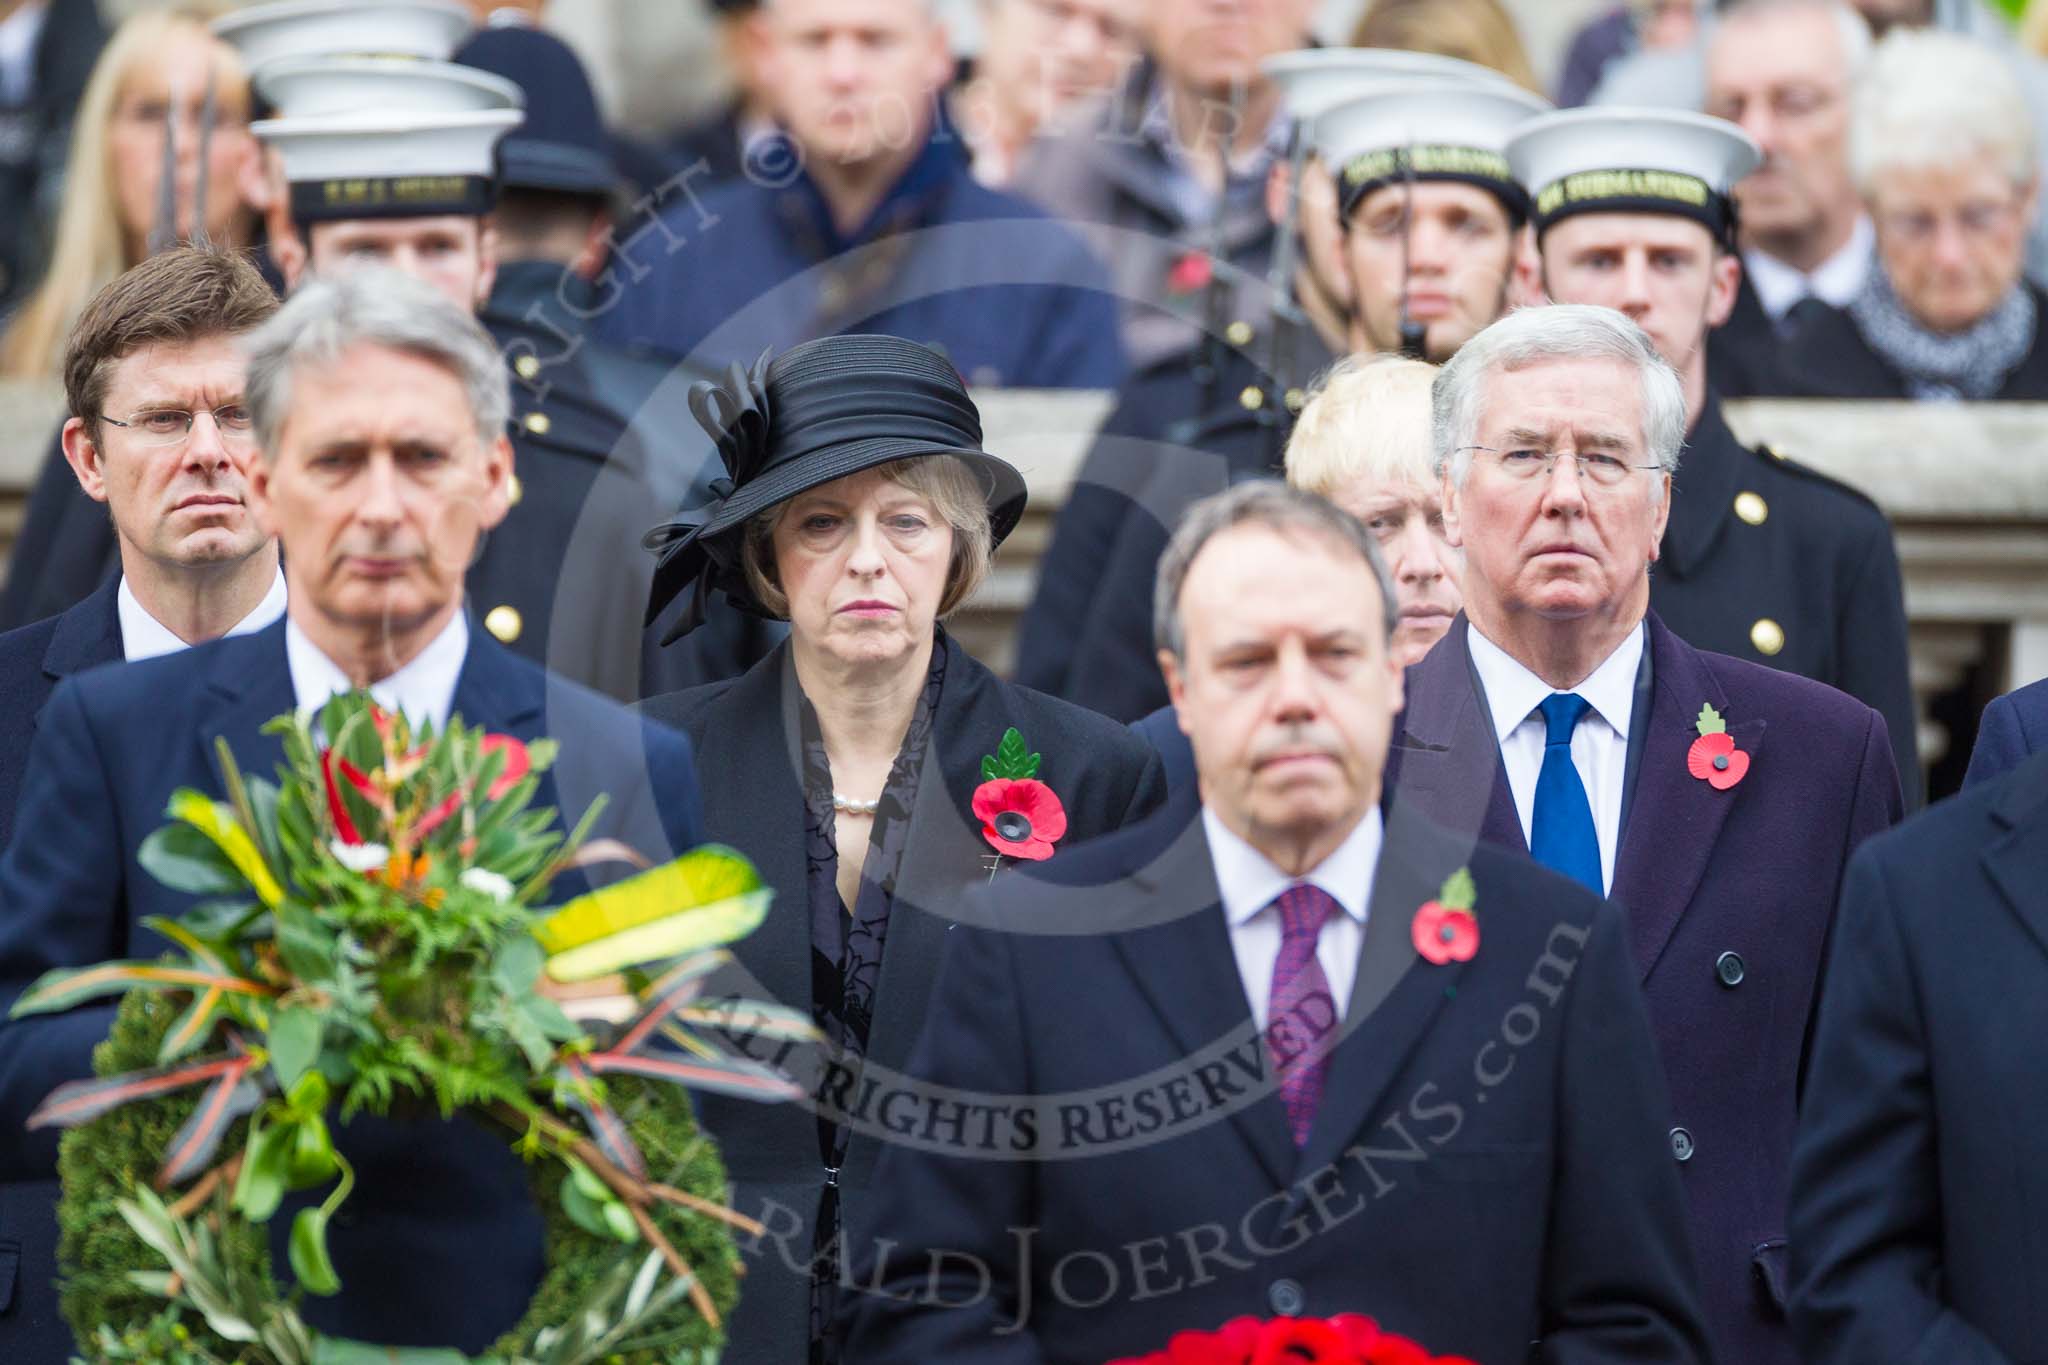 Remembrance Sunday at the Cenotaph 2015: In focus in the second row The Rt Hon Greg Clark MP (Secretary of State for Communities and Local Government), The Rt Hon Theresa May MP (Secretary of State for the Home Department), and The Rt Hon Michael Fallon MP (Secretary of State for Defence). Image #153, 08 November 2015 11:02 Whitehall, London, UK